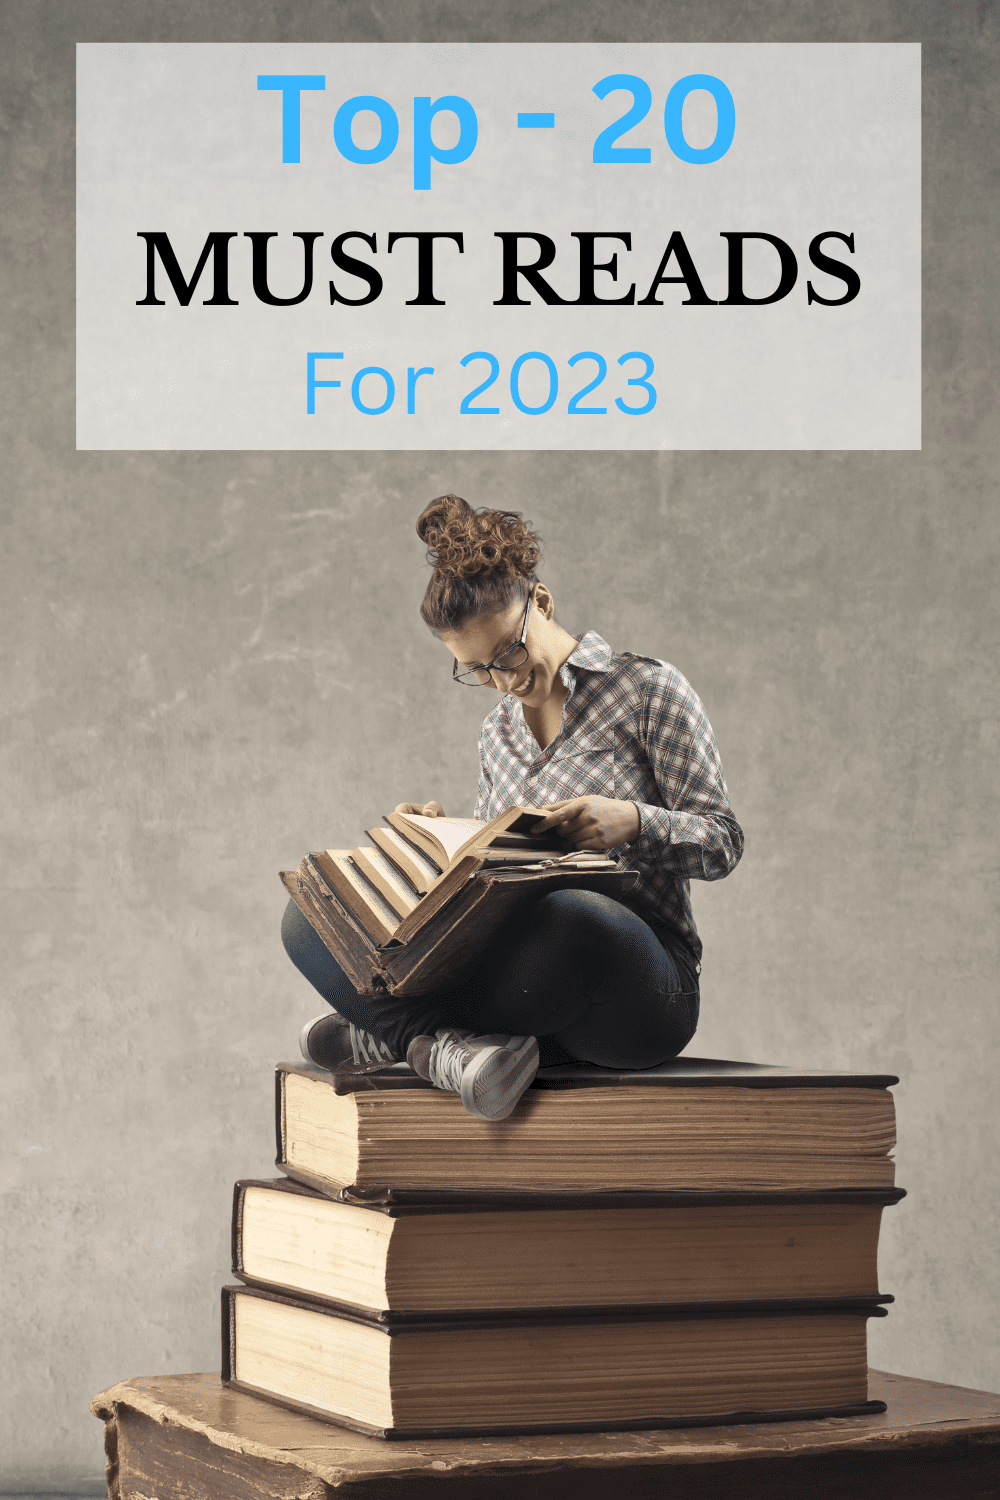 06 Top 20 must reads